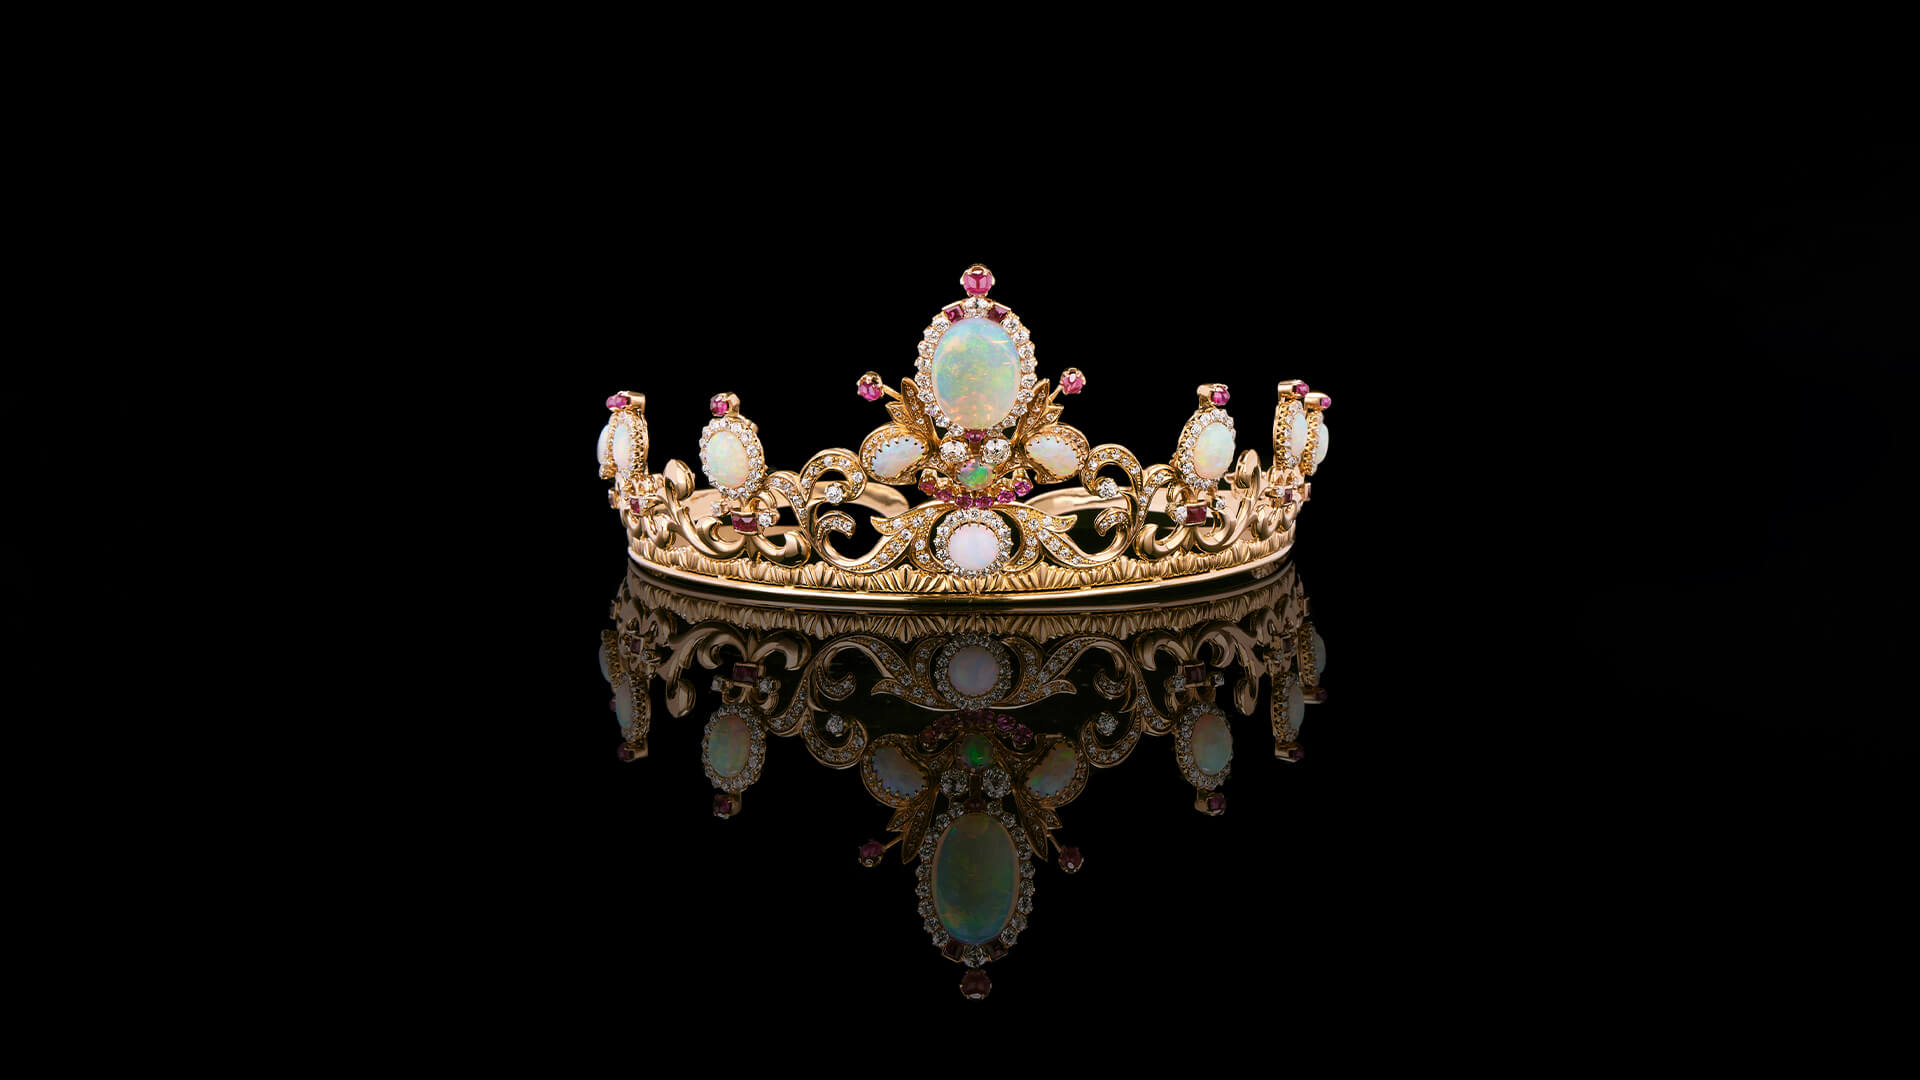 An extremely rare opal tiara from the family of the Late Jean Pierre François Joseph Pineton de Chambrun, Marquis de Chambrun, Marquis d'Amefreville (1903-2004) and his second wife Muriel, Marquise de Chambrun. Estimate £12,000-£18,000